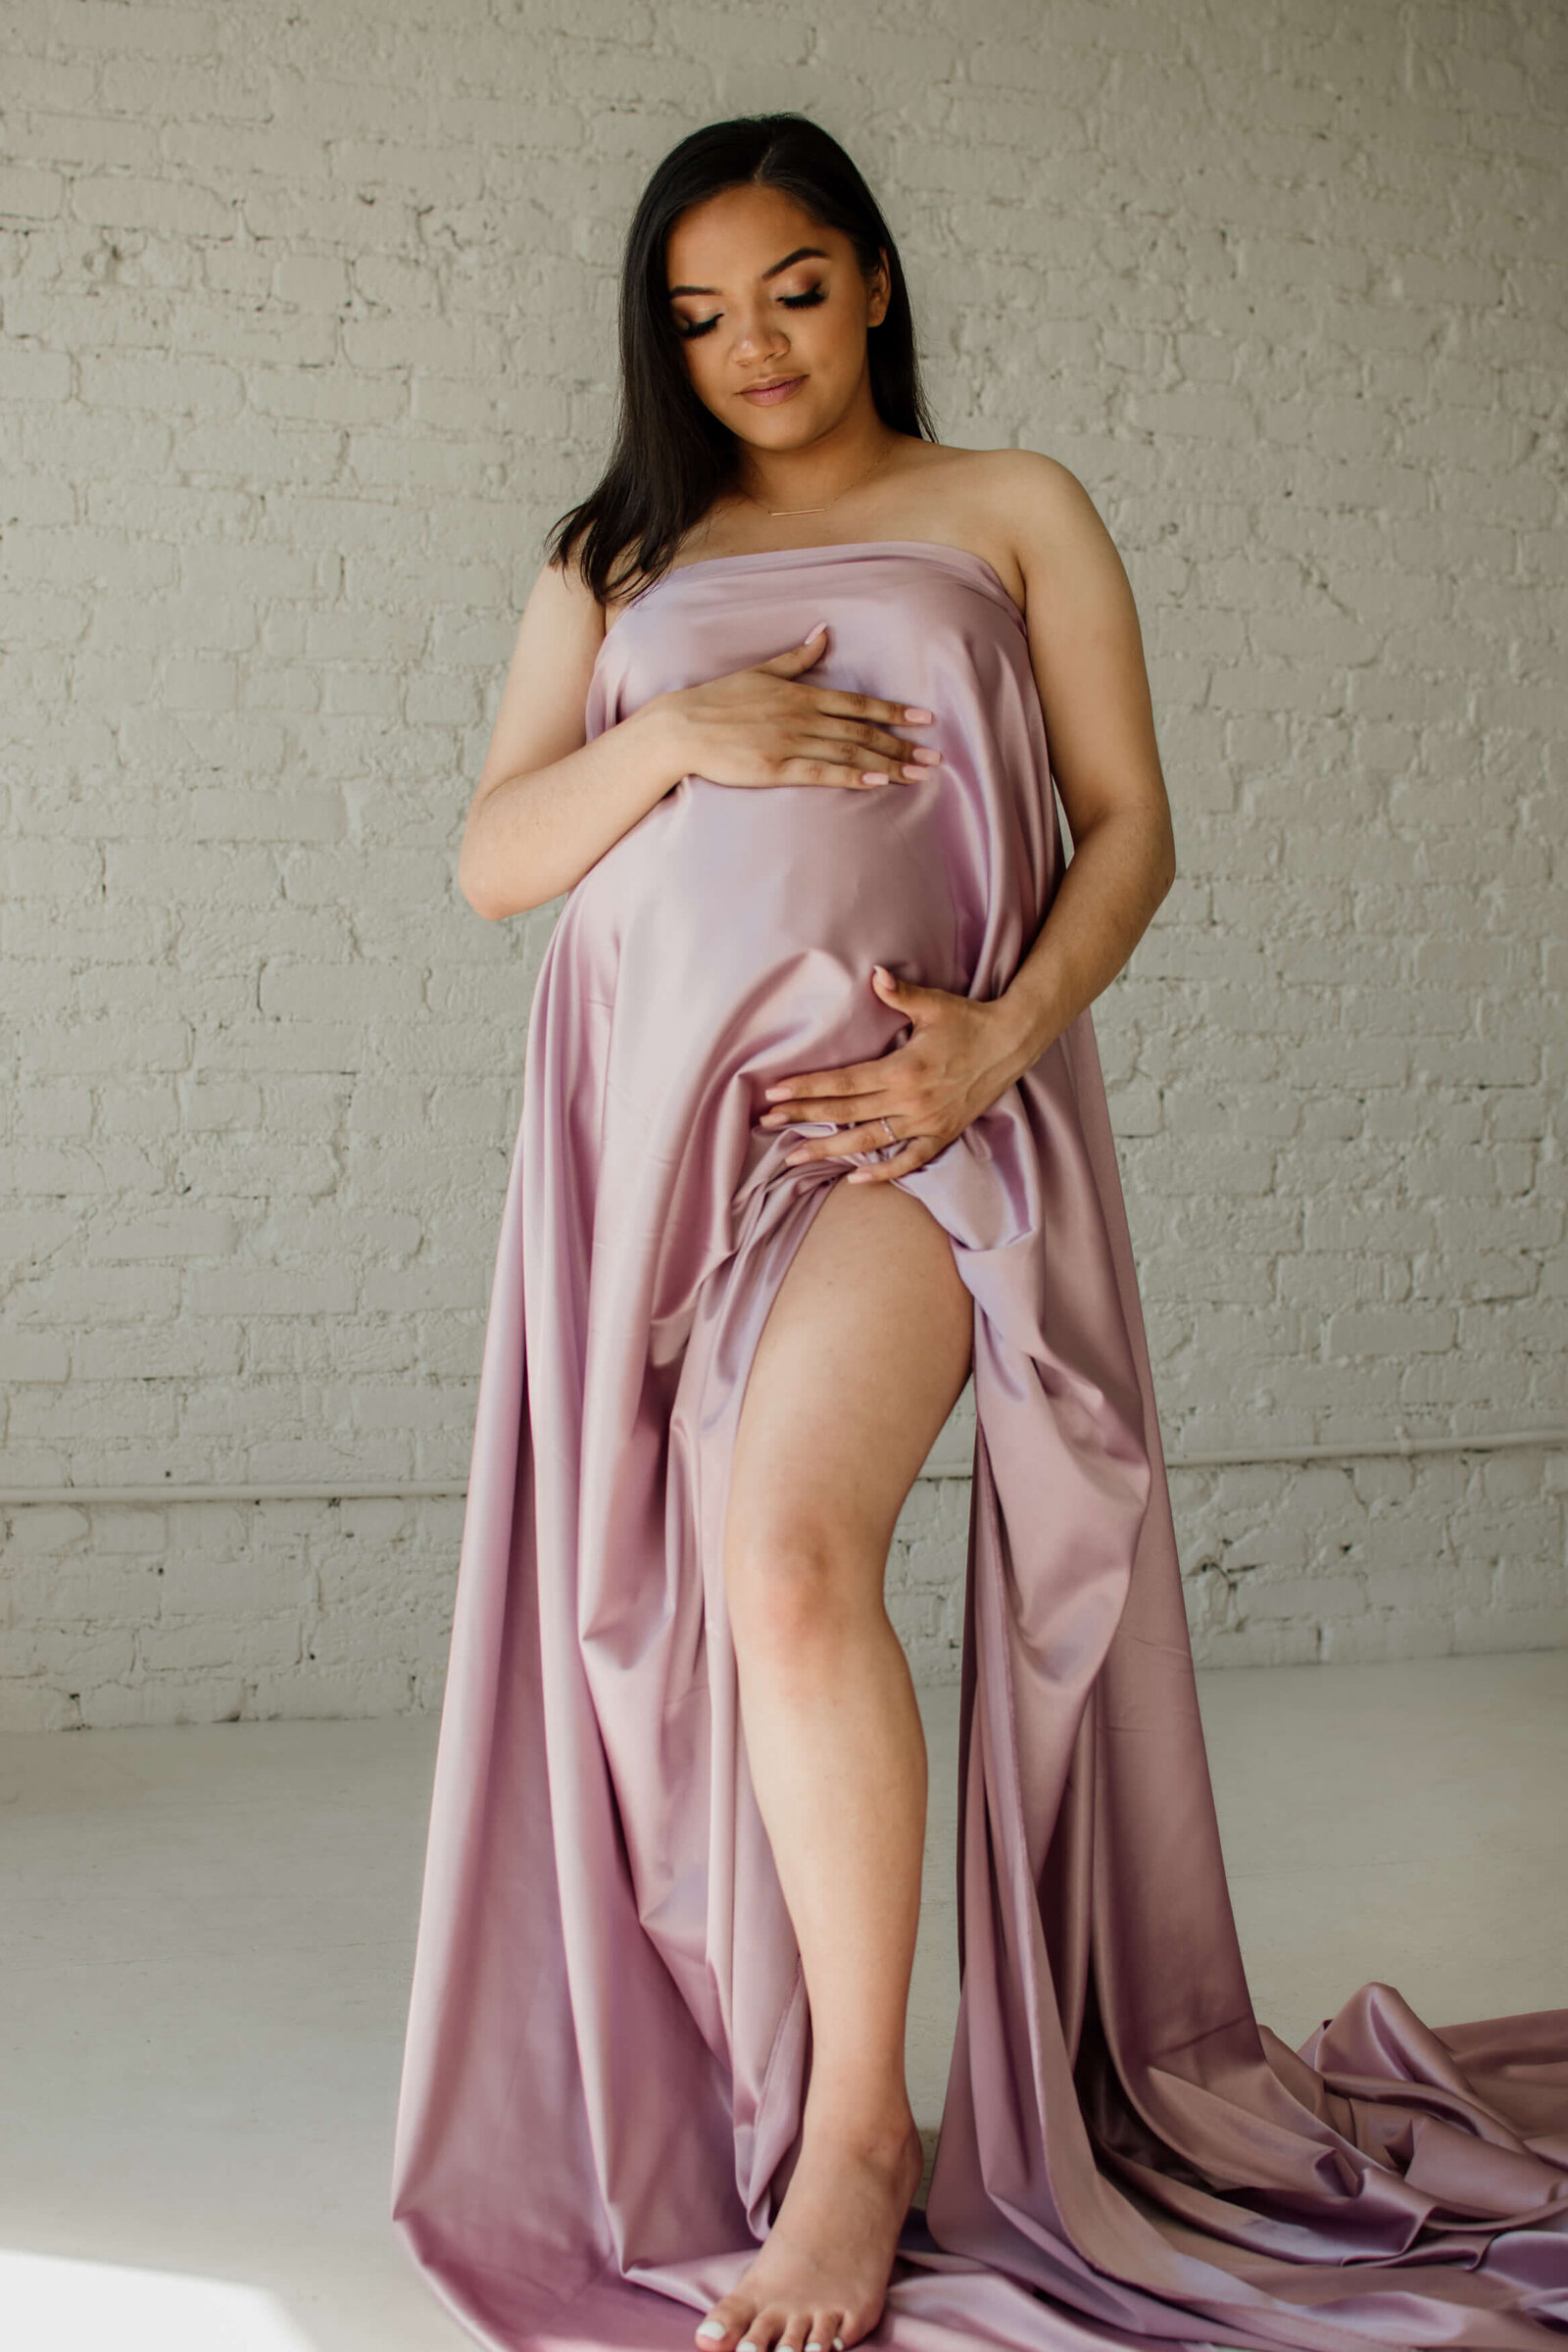 Mom-to-be draped in pink satin.